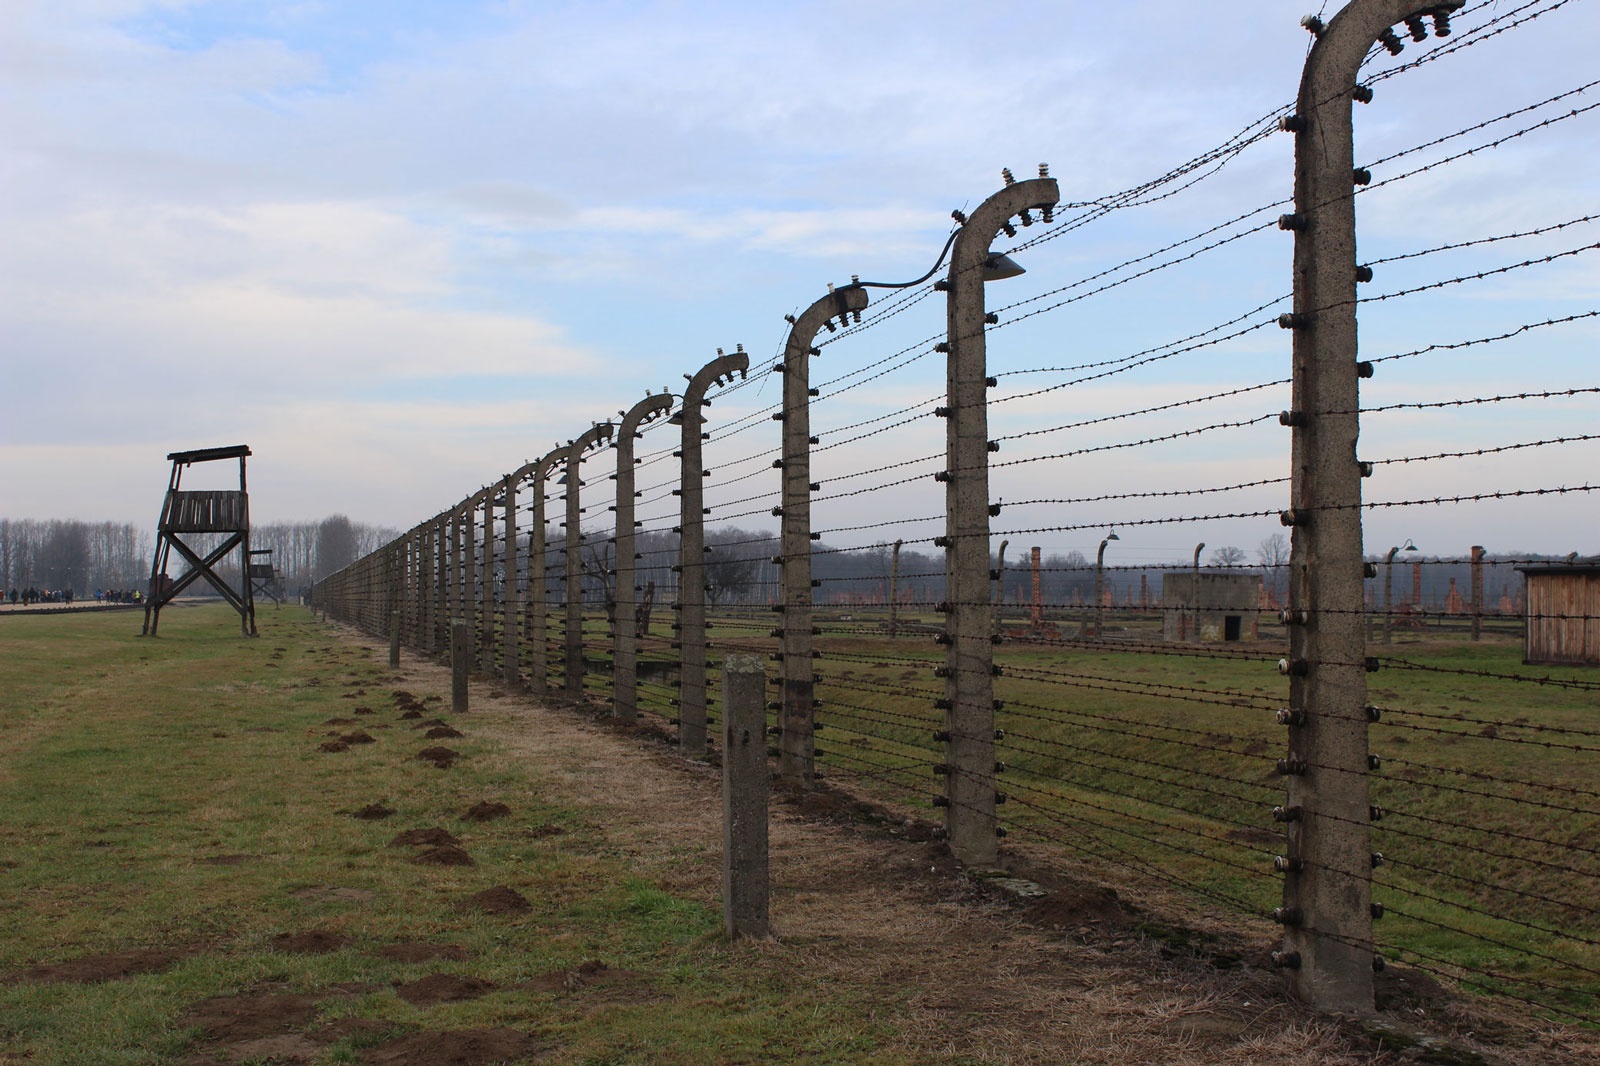 Fence and watchtower at Birkenau